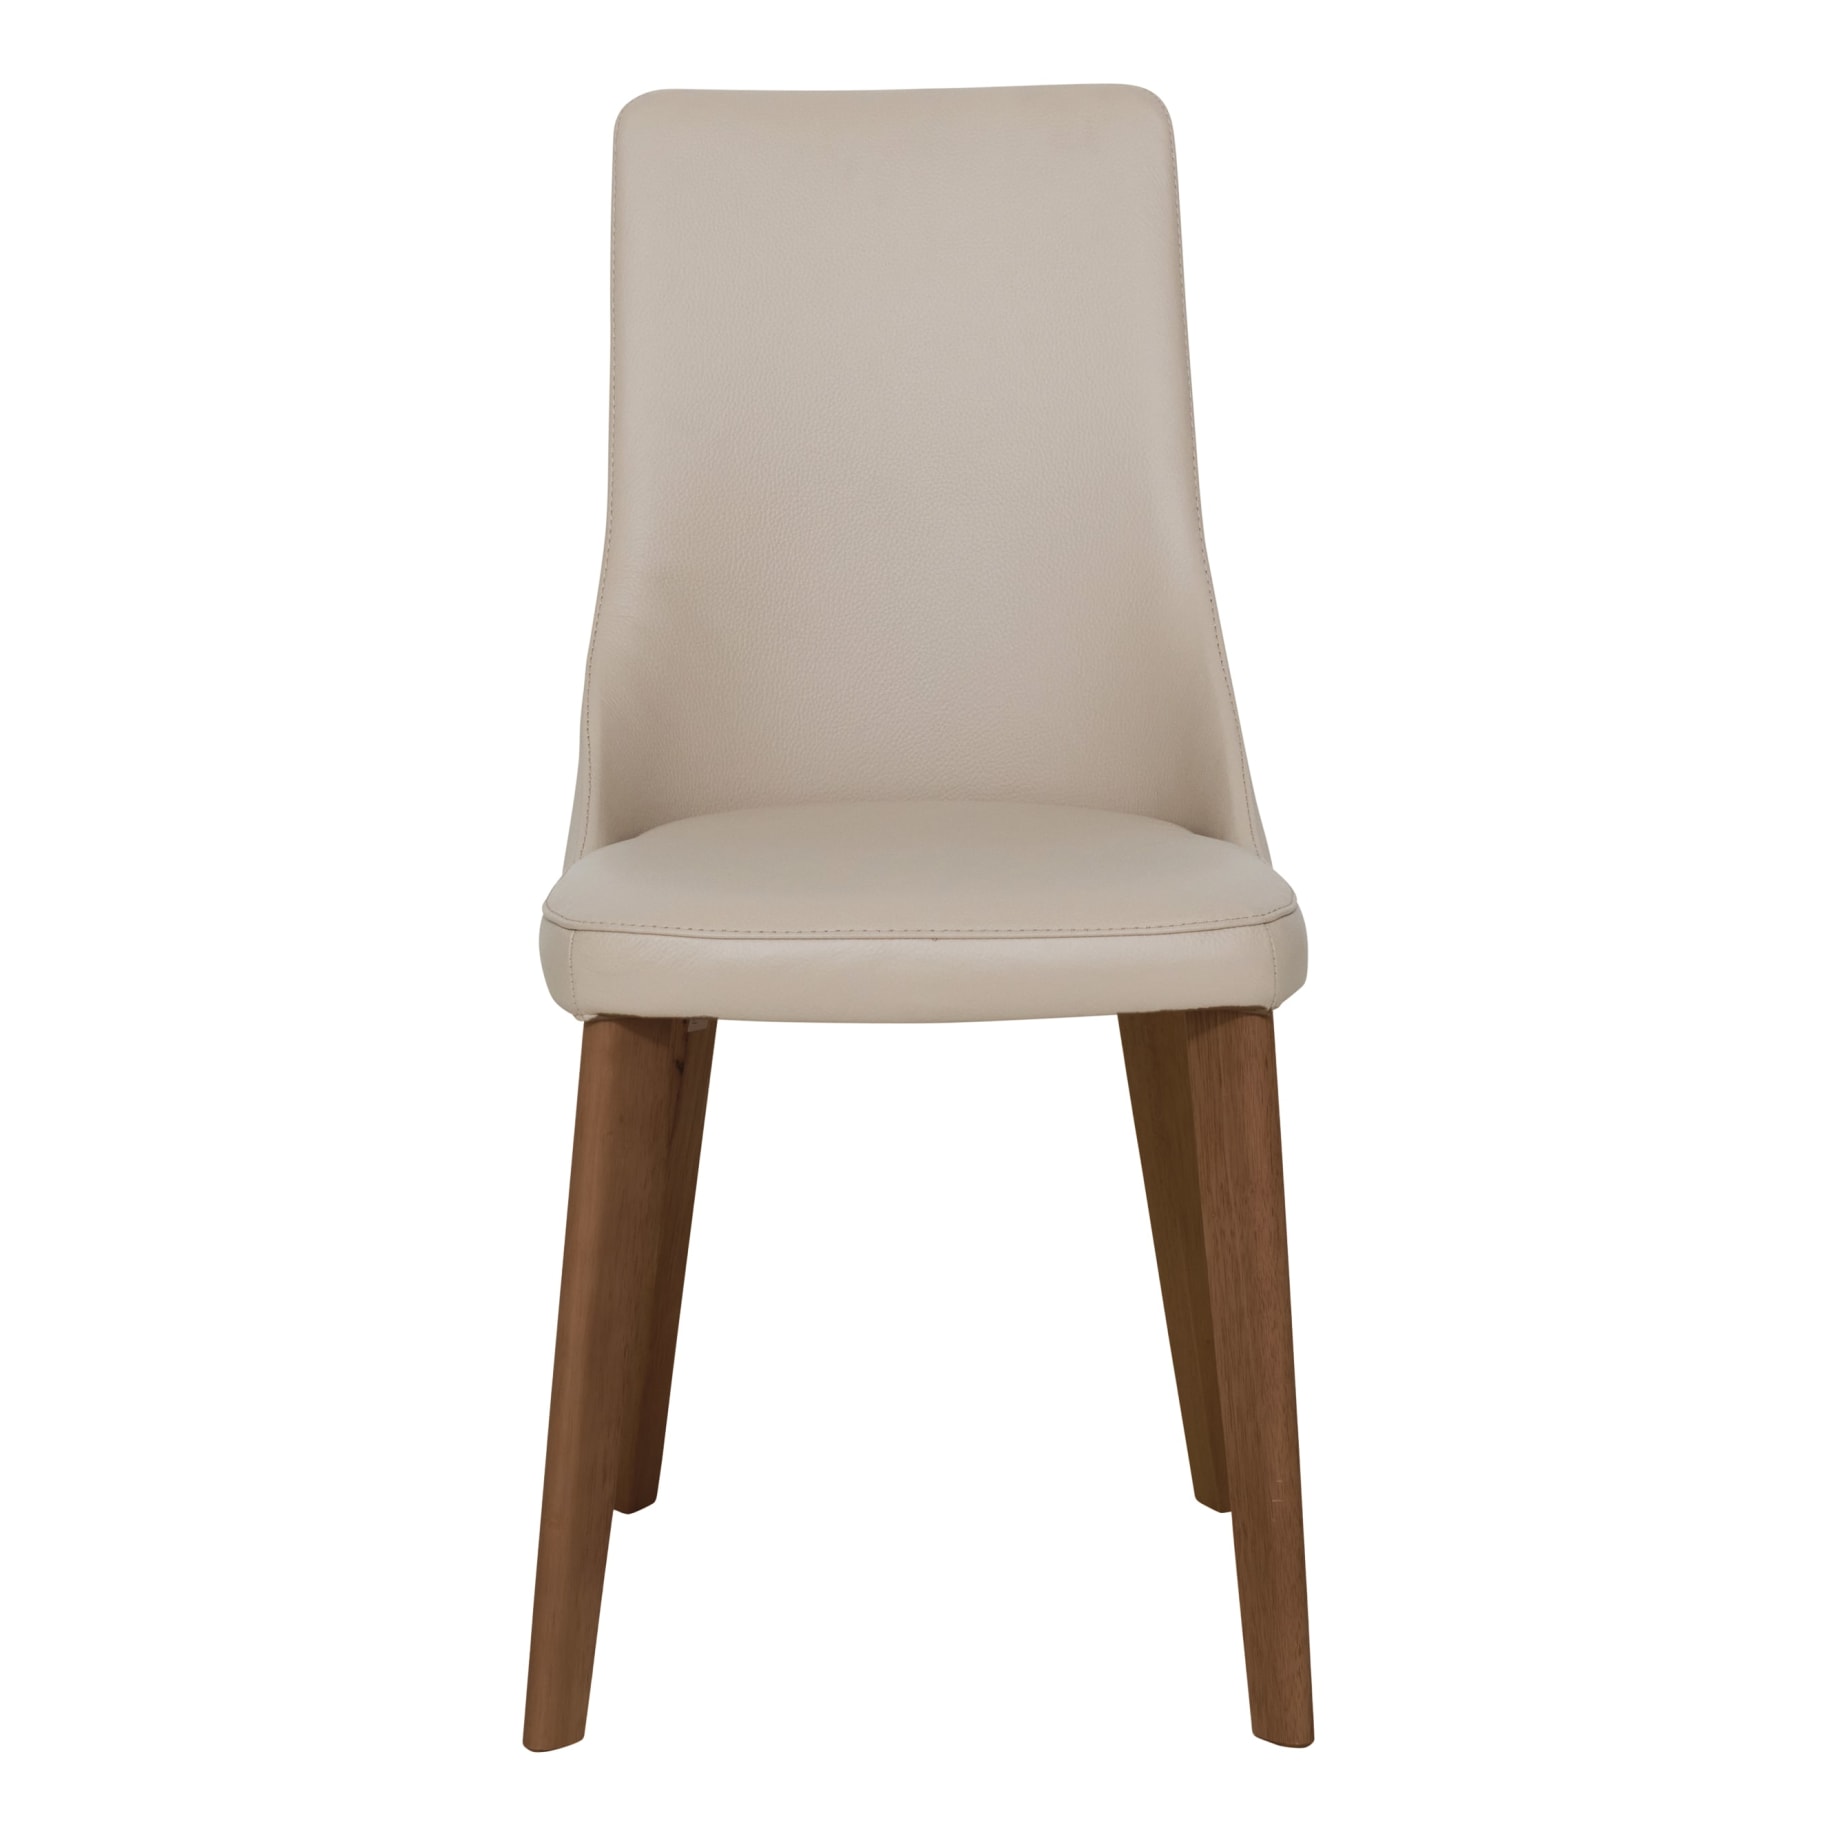 Panama Dining Chair in Mocha / Blackwood Stain